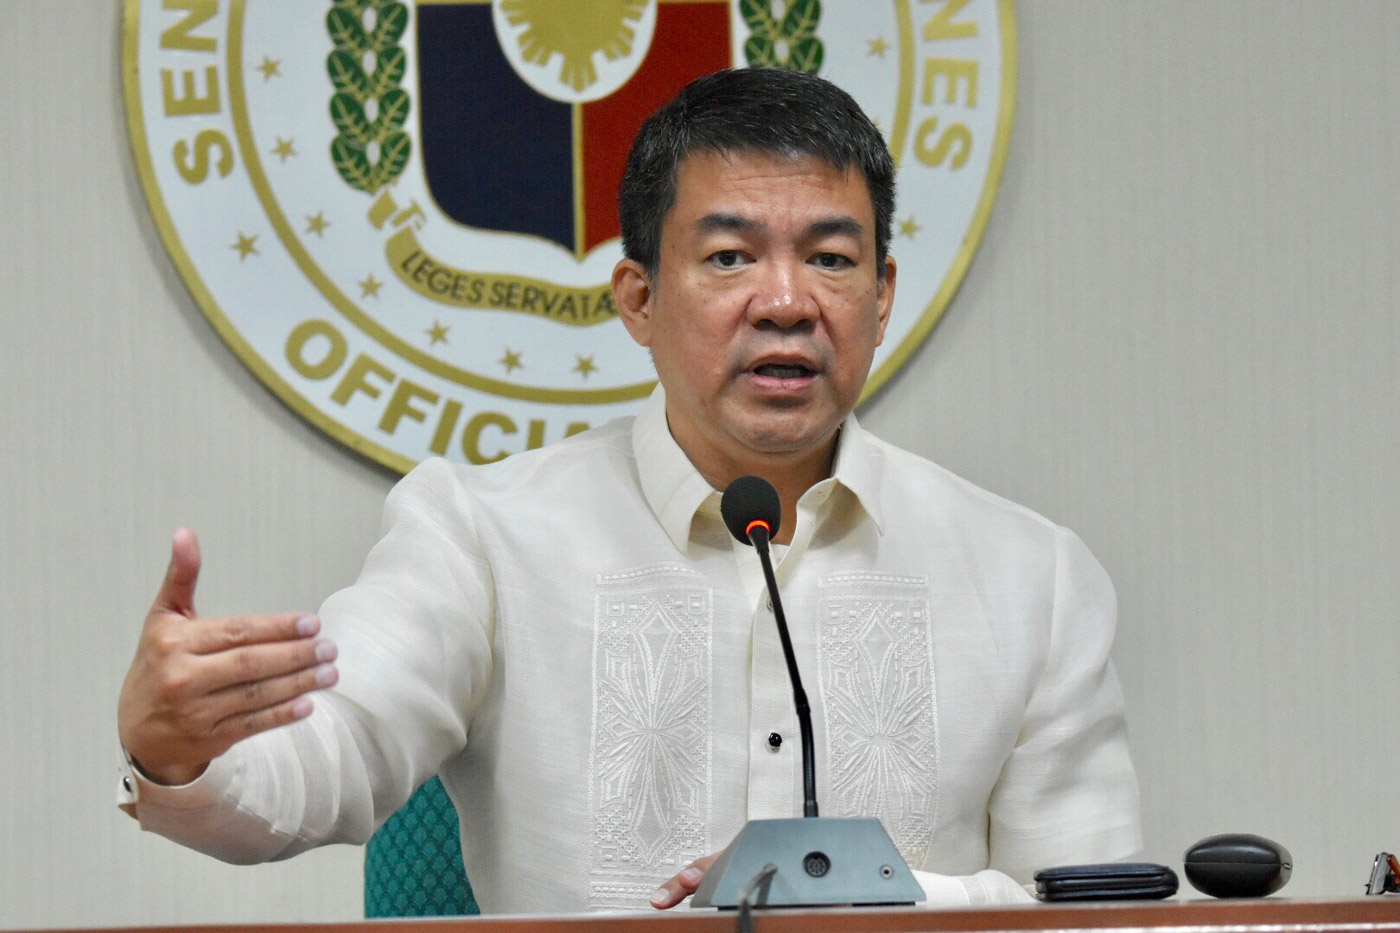 PROTOCOL BREACH. In this file photo, Senator Aquilino Pimentel III holds a press briefing on May 21, 2018. Photo by Angie de Silva/Rappler 